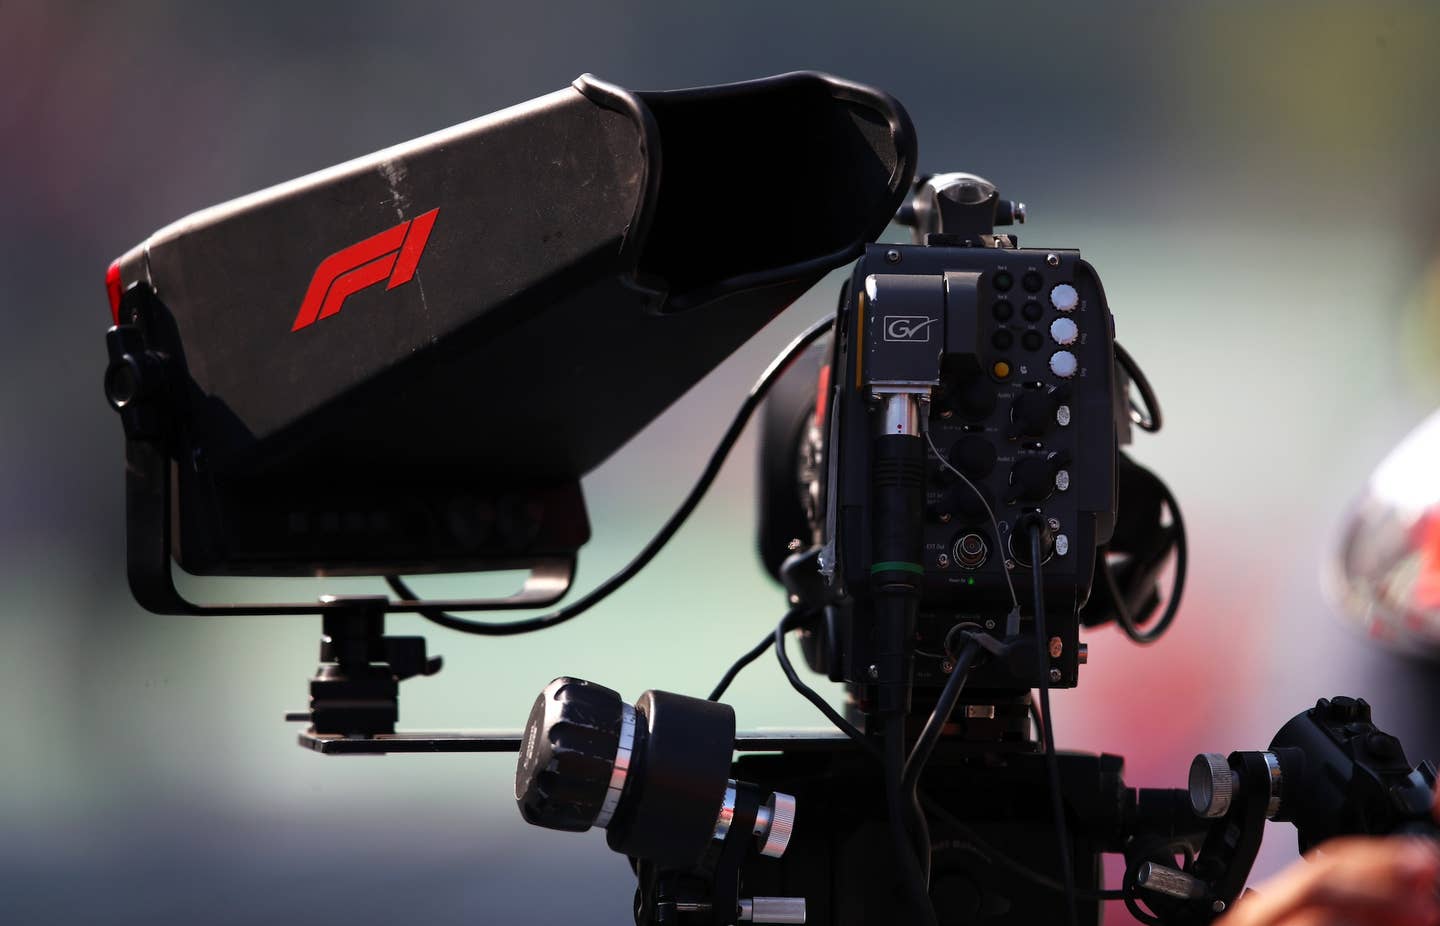 MONZA, ITALY - SEPTEMBER 12: A TV camera during Round 5:Monza feature race of the Formula 2 Championship at Autodromo di Monza on September 12, 2021 in Monza, Italy. (Photo by Joe Portlock - Formula 1/Formula Motorsport Limited via Getty Images)